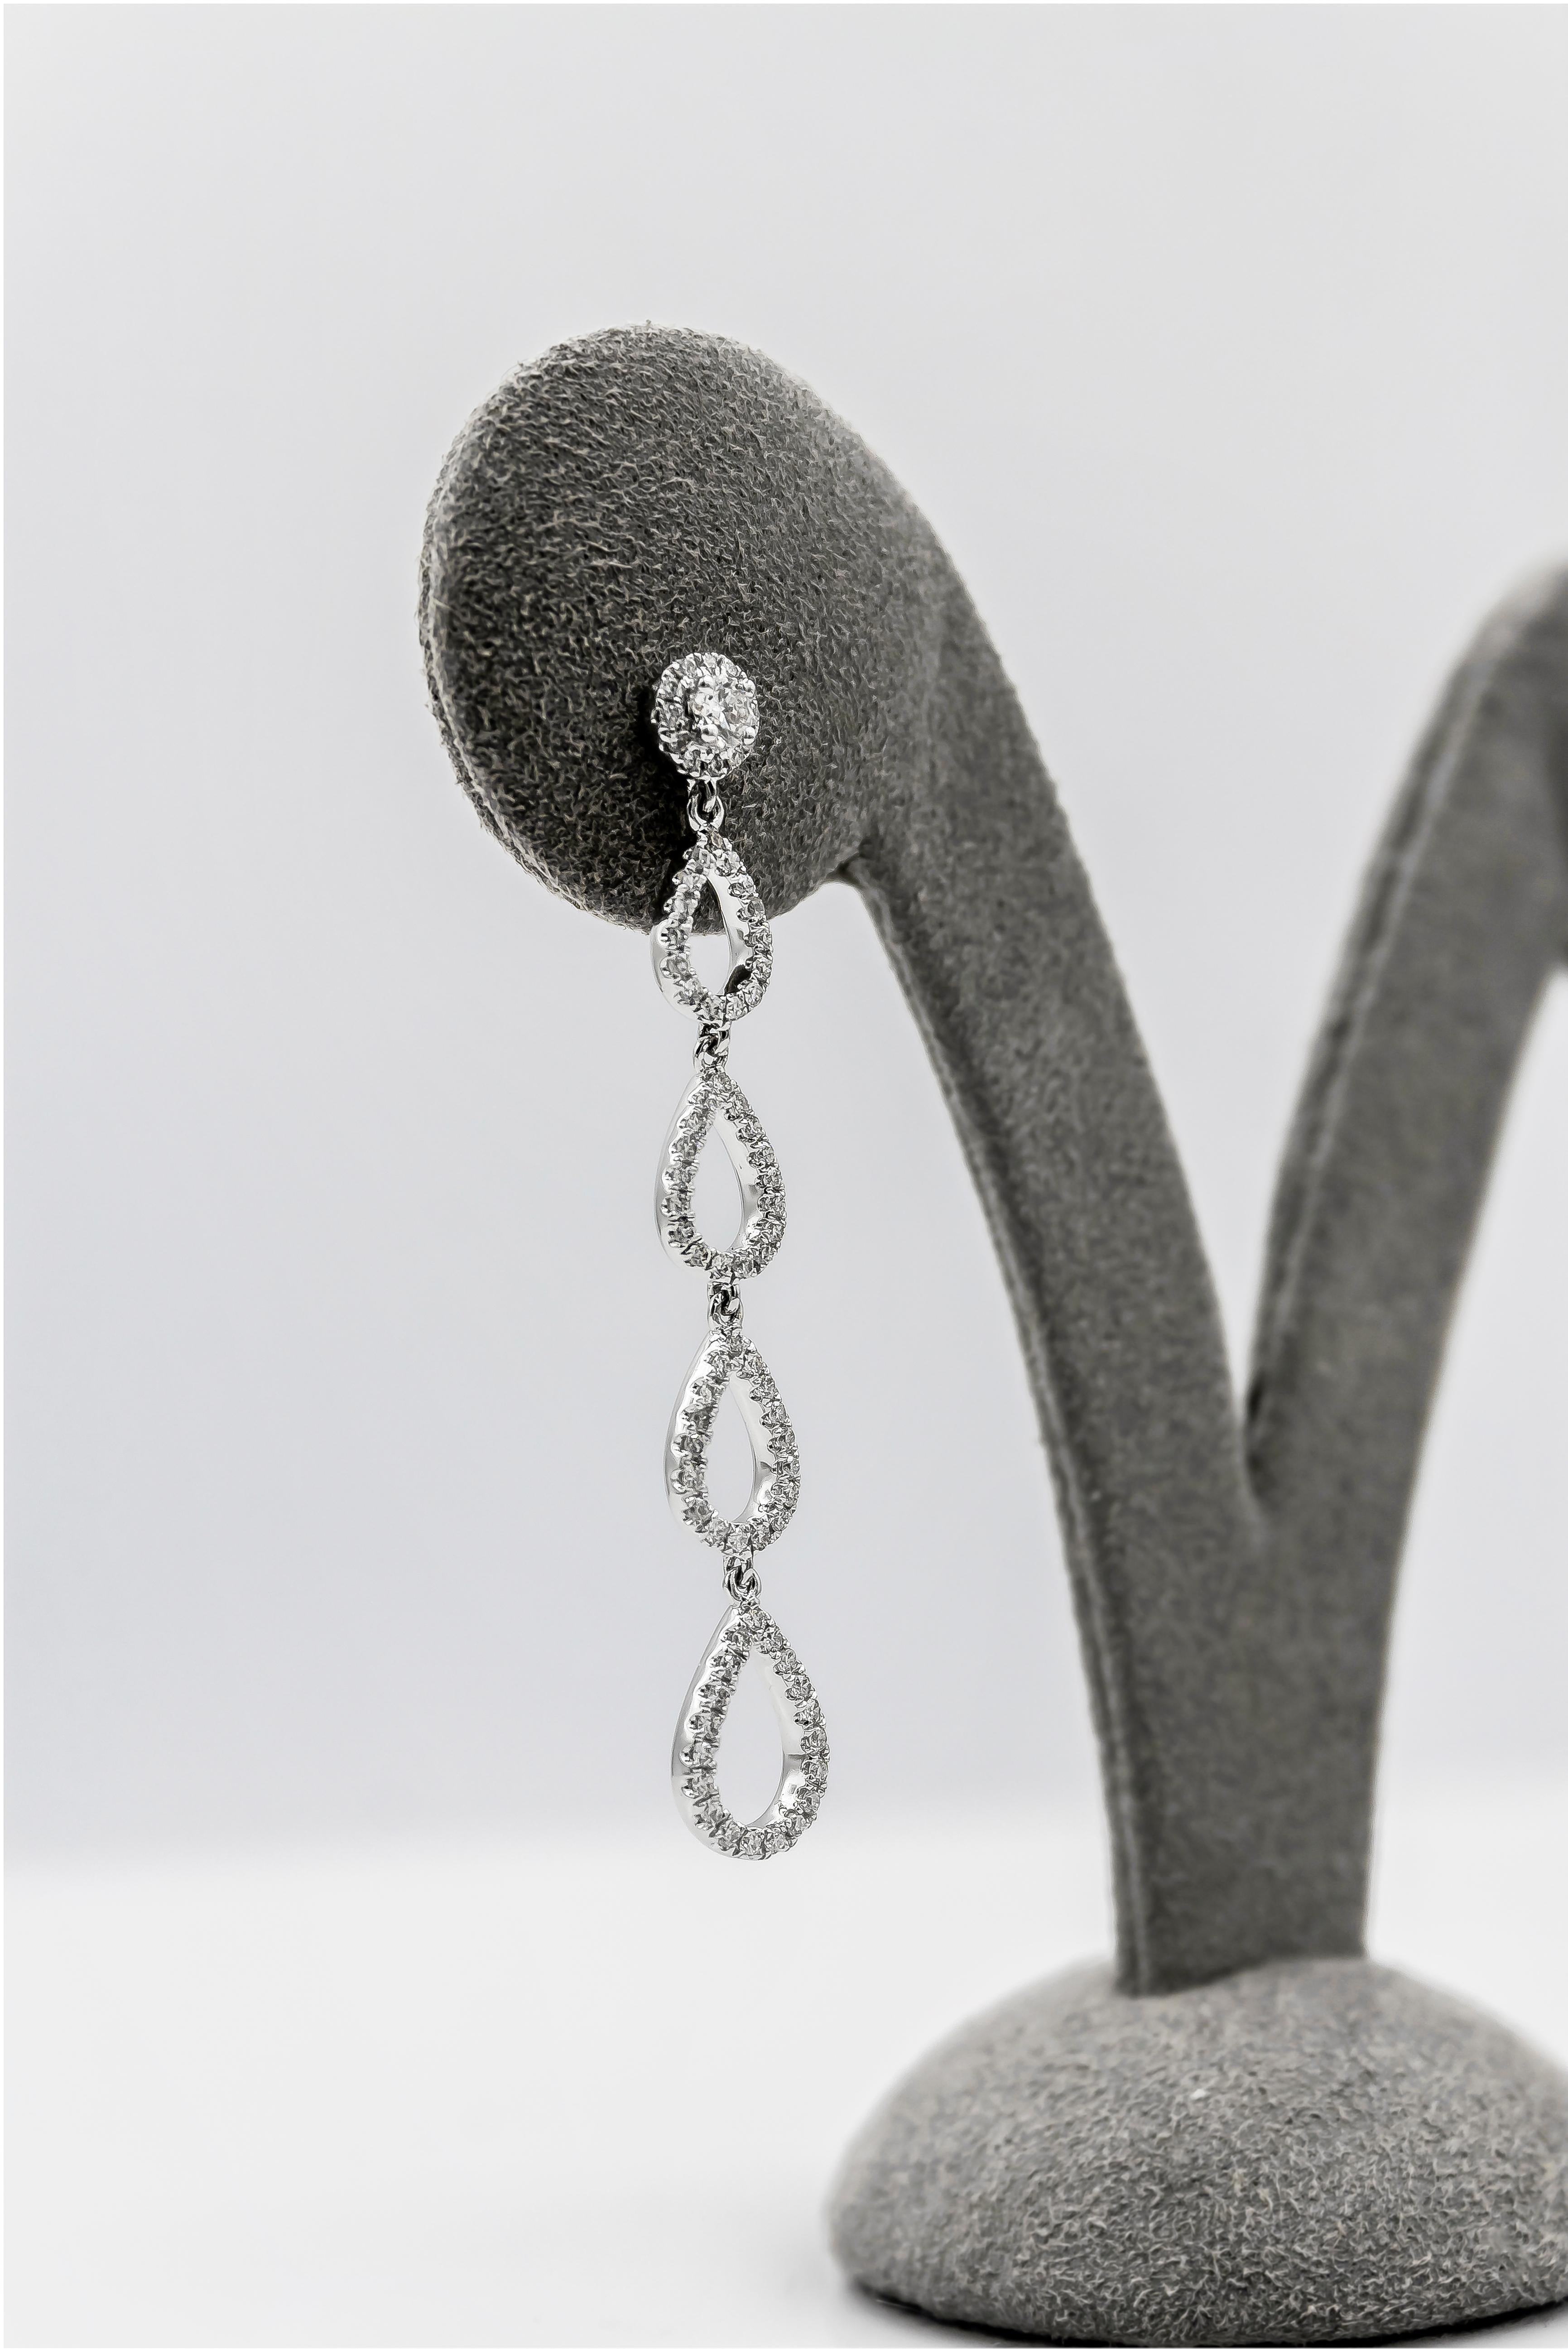 A stylish pair of drop earrings features four open-work pear shape designs encrusted with round brilliant diamonds. Attached to a post set with a round diamond in a halo. Total weight of diamonds is 0.63 carats diamonds.

Roman Malakov is a custom